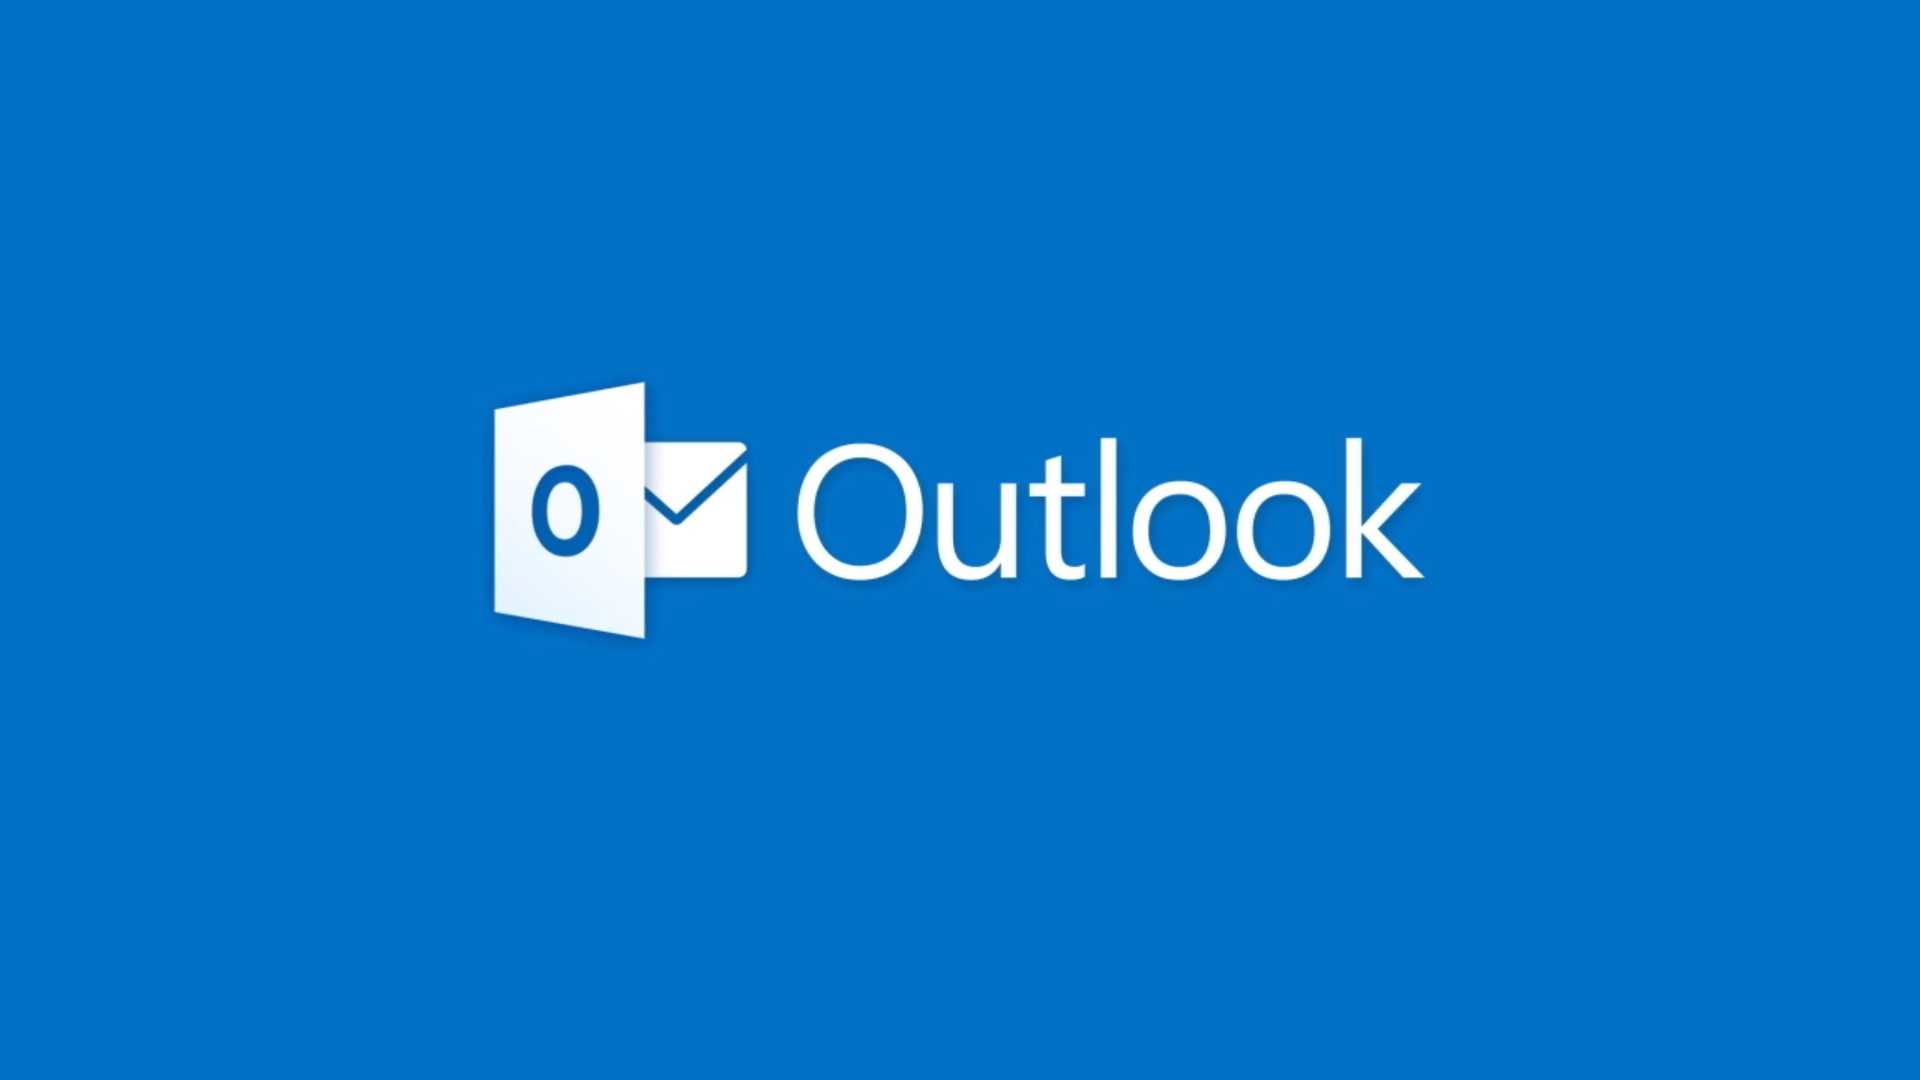 download the last version for ios Microsoft Office Outlook 2021